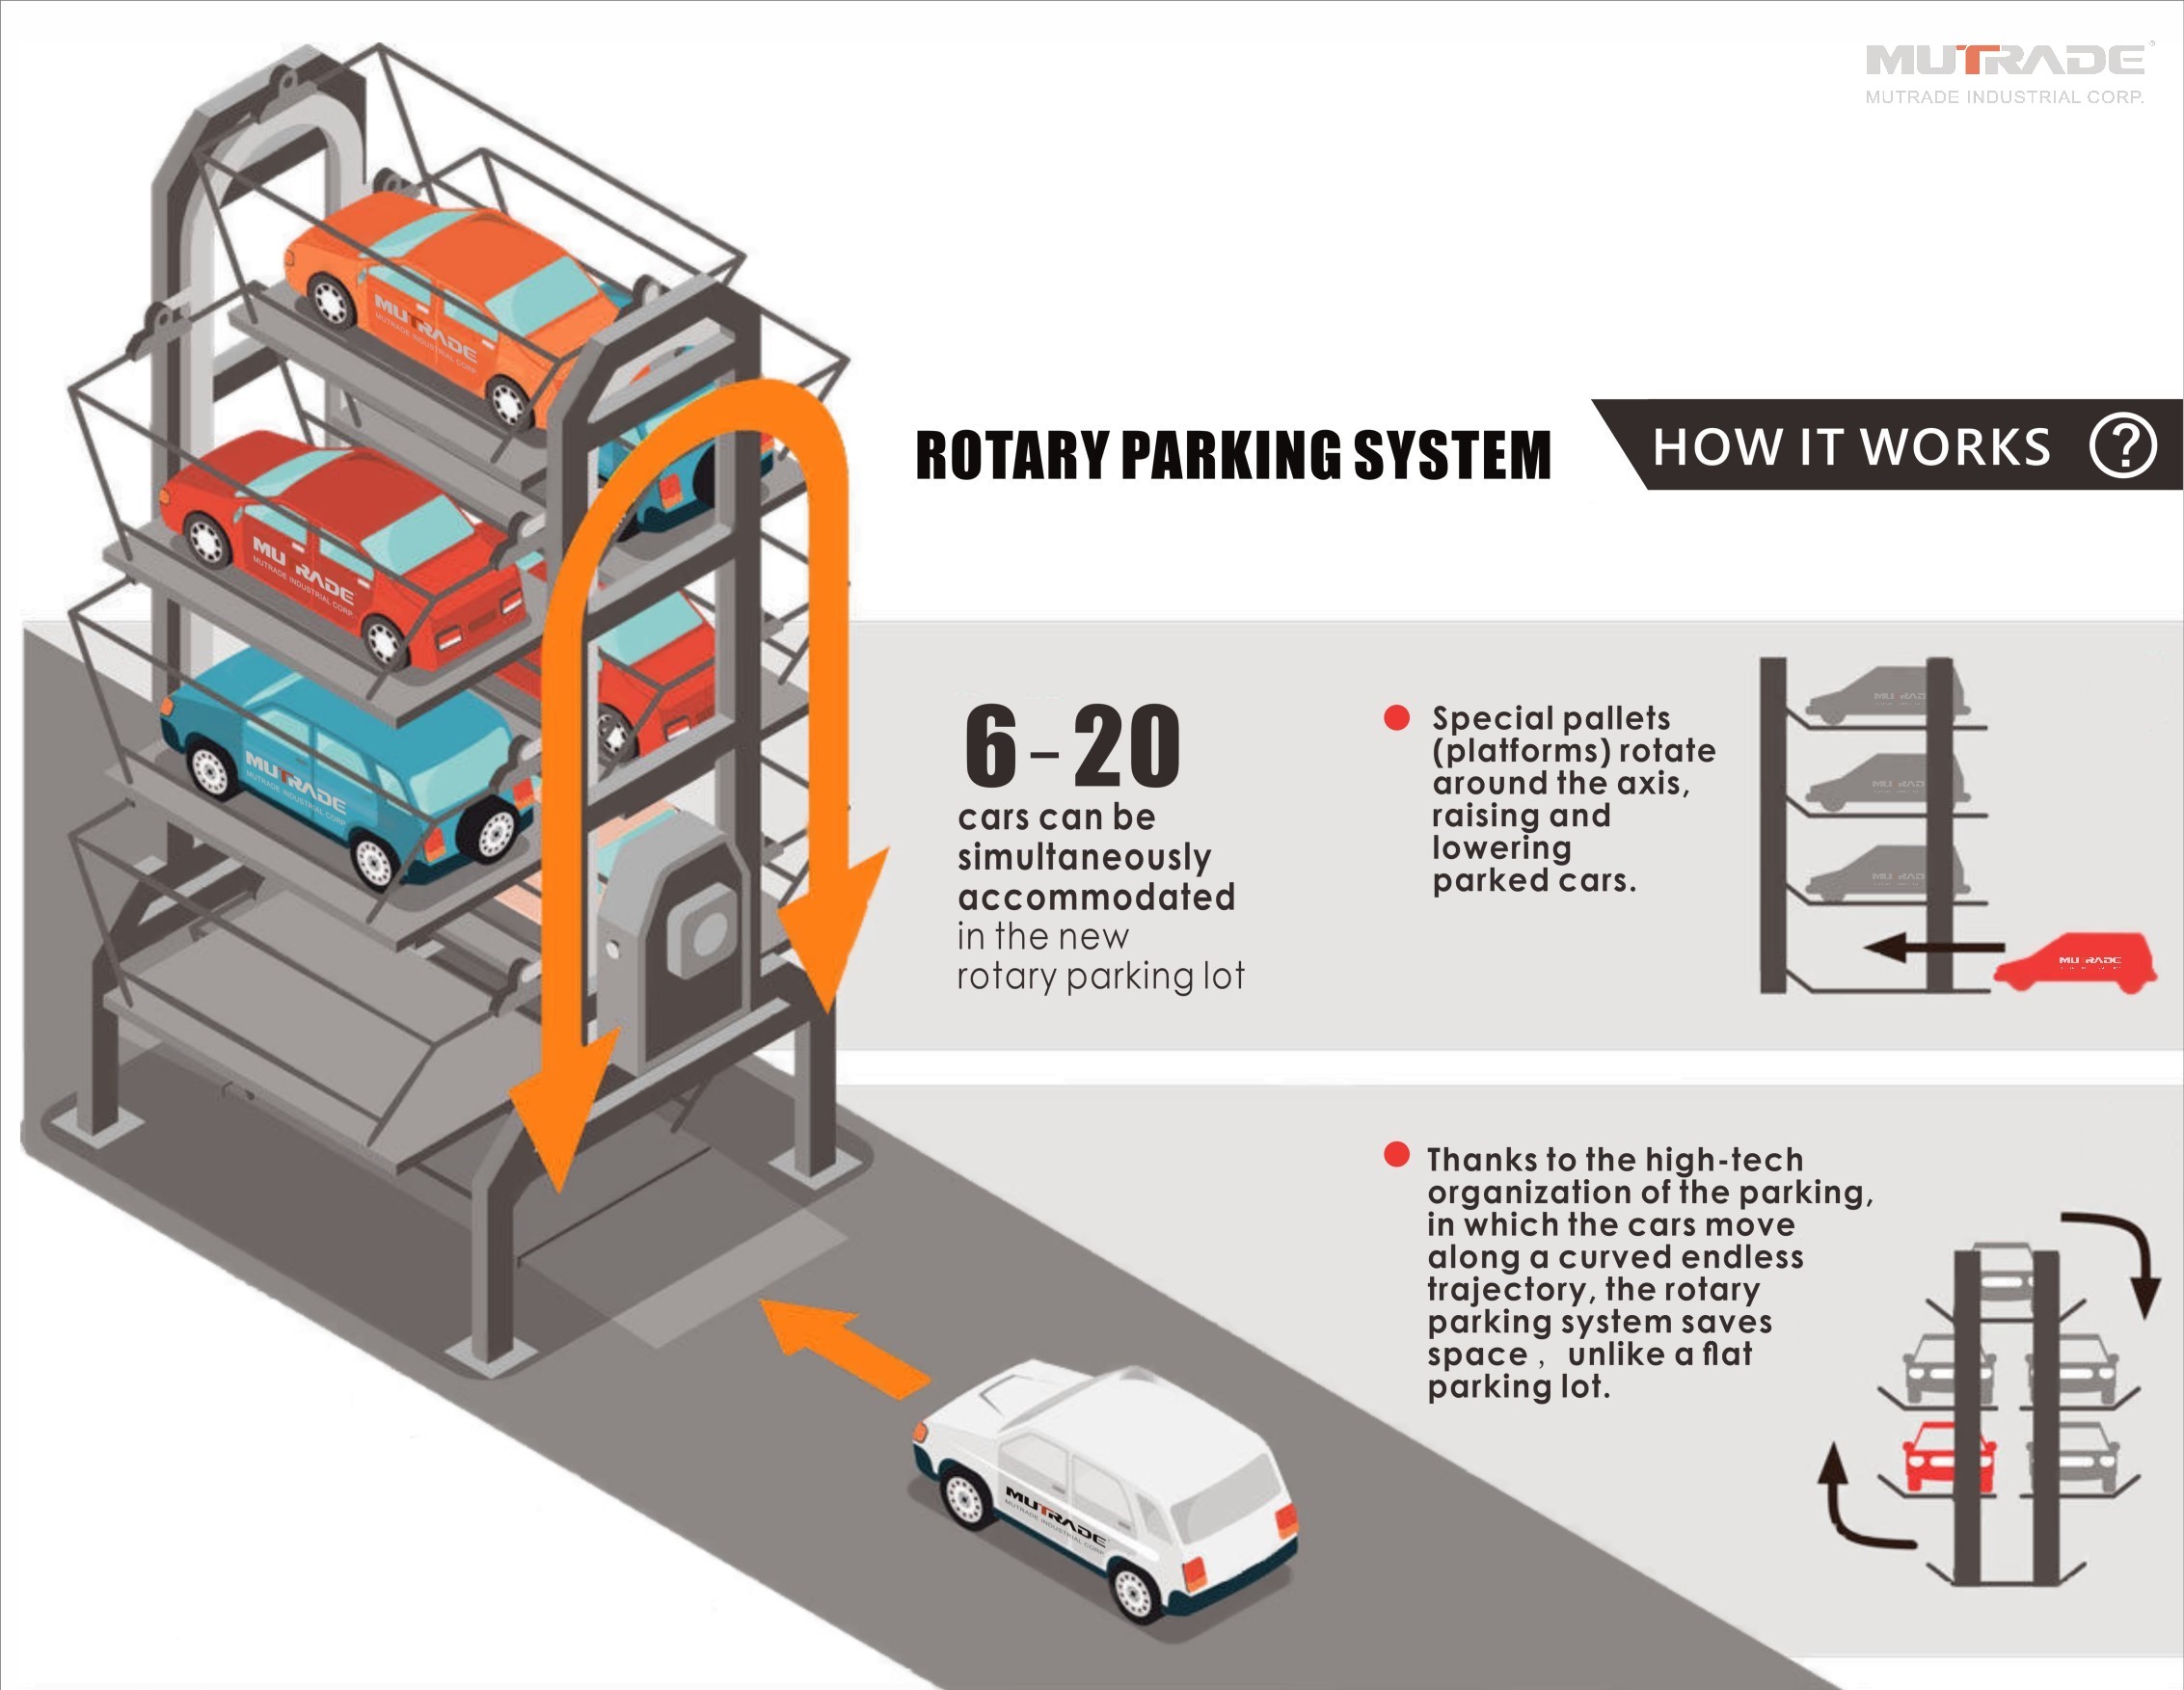 ARP rotary parking system automated parking principle china mutrade